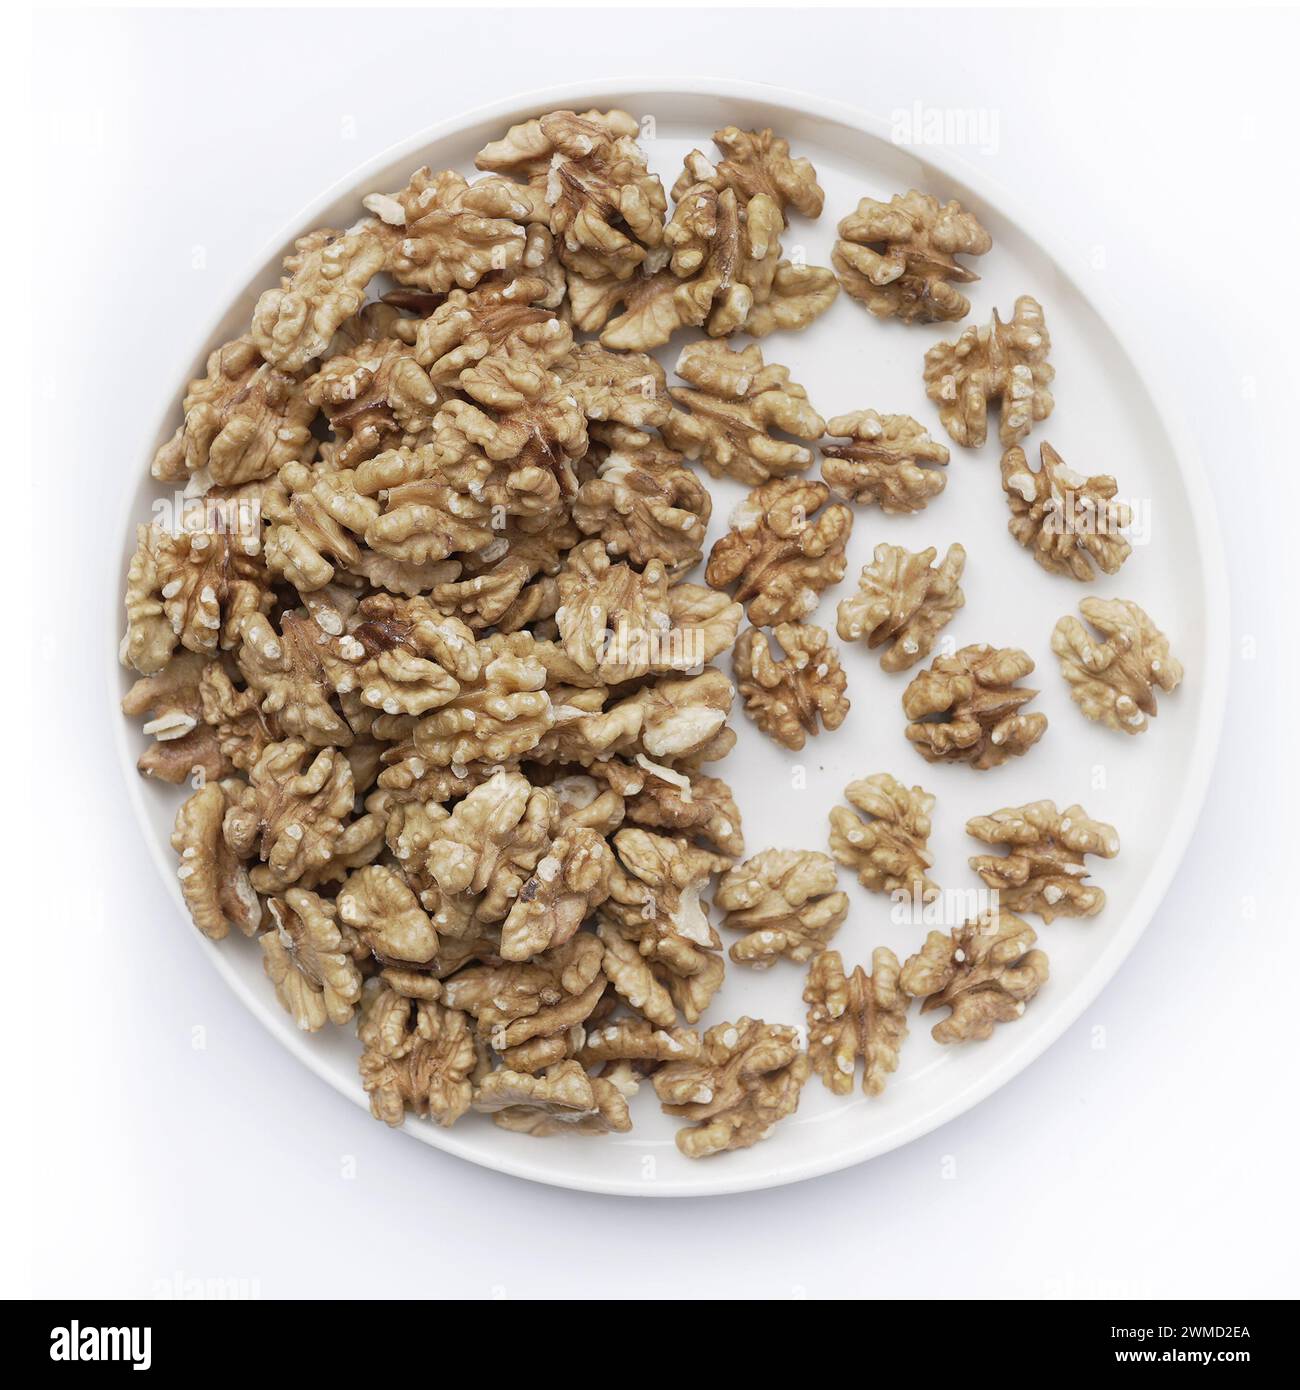 A plate brimming with walnut halves showcases the rich textures and natural oils of these nutritious nuts. Perfect for culinary use or as a healthy snack. Stock Photo